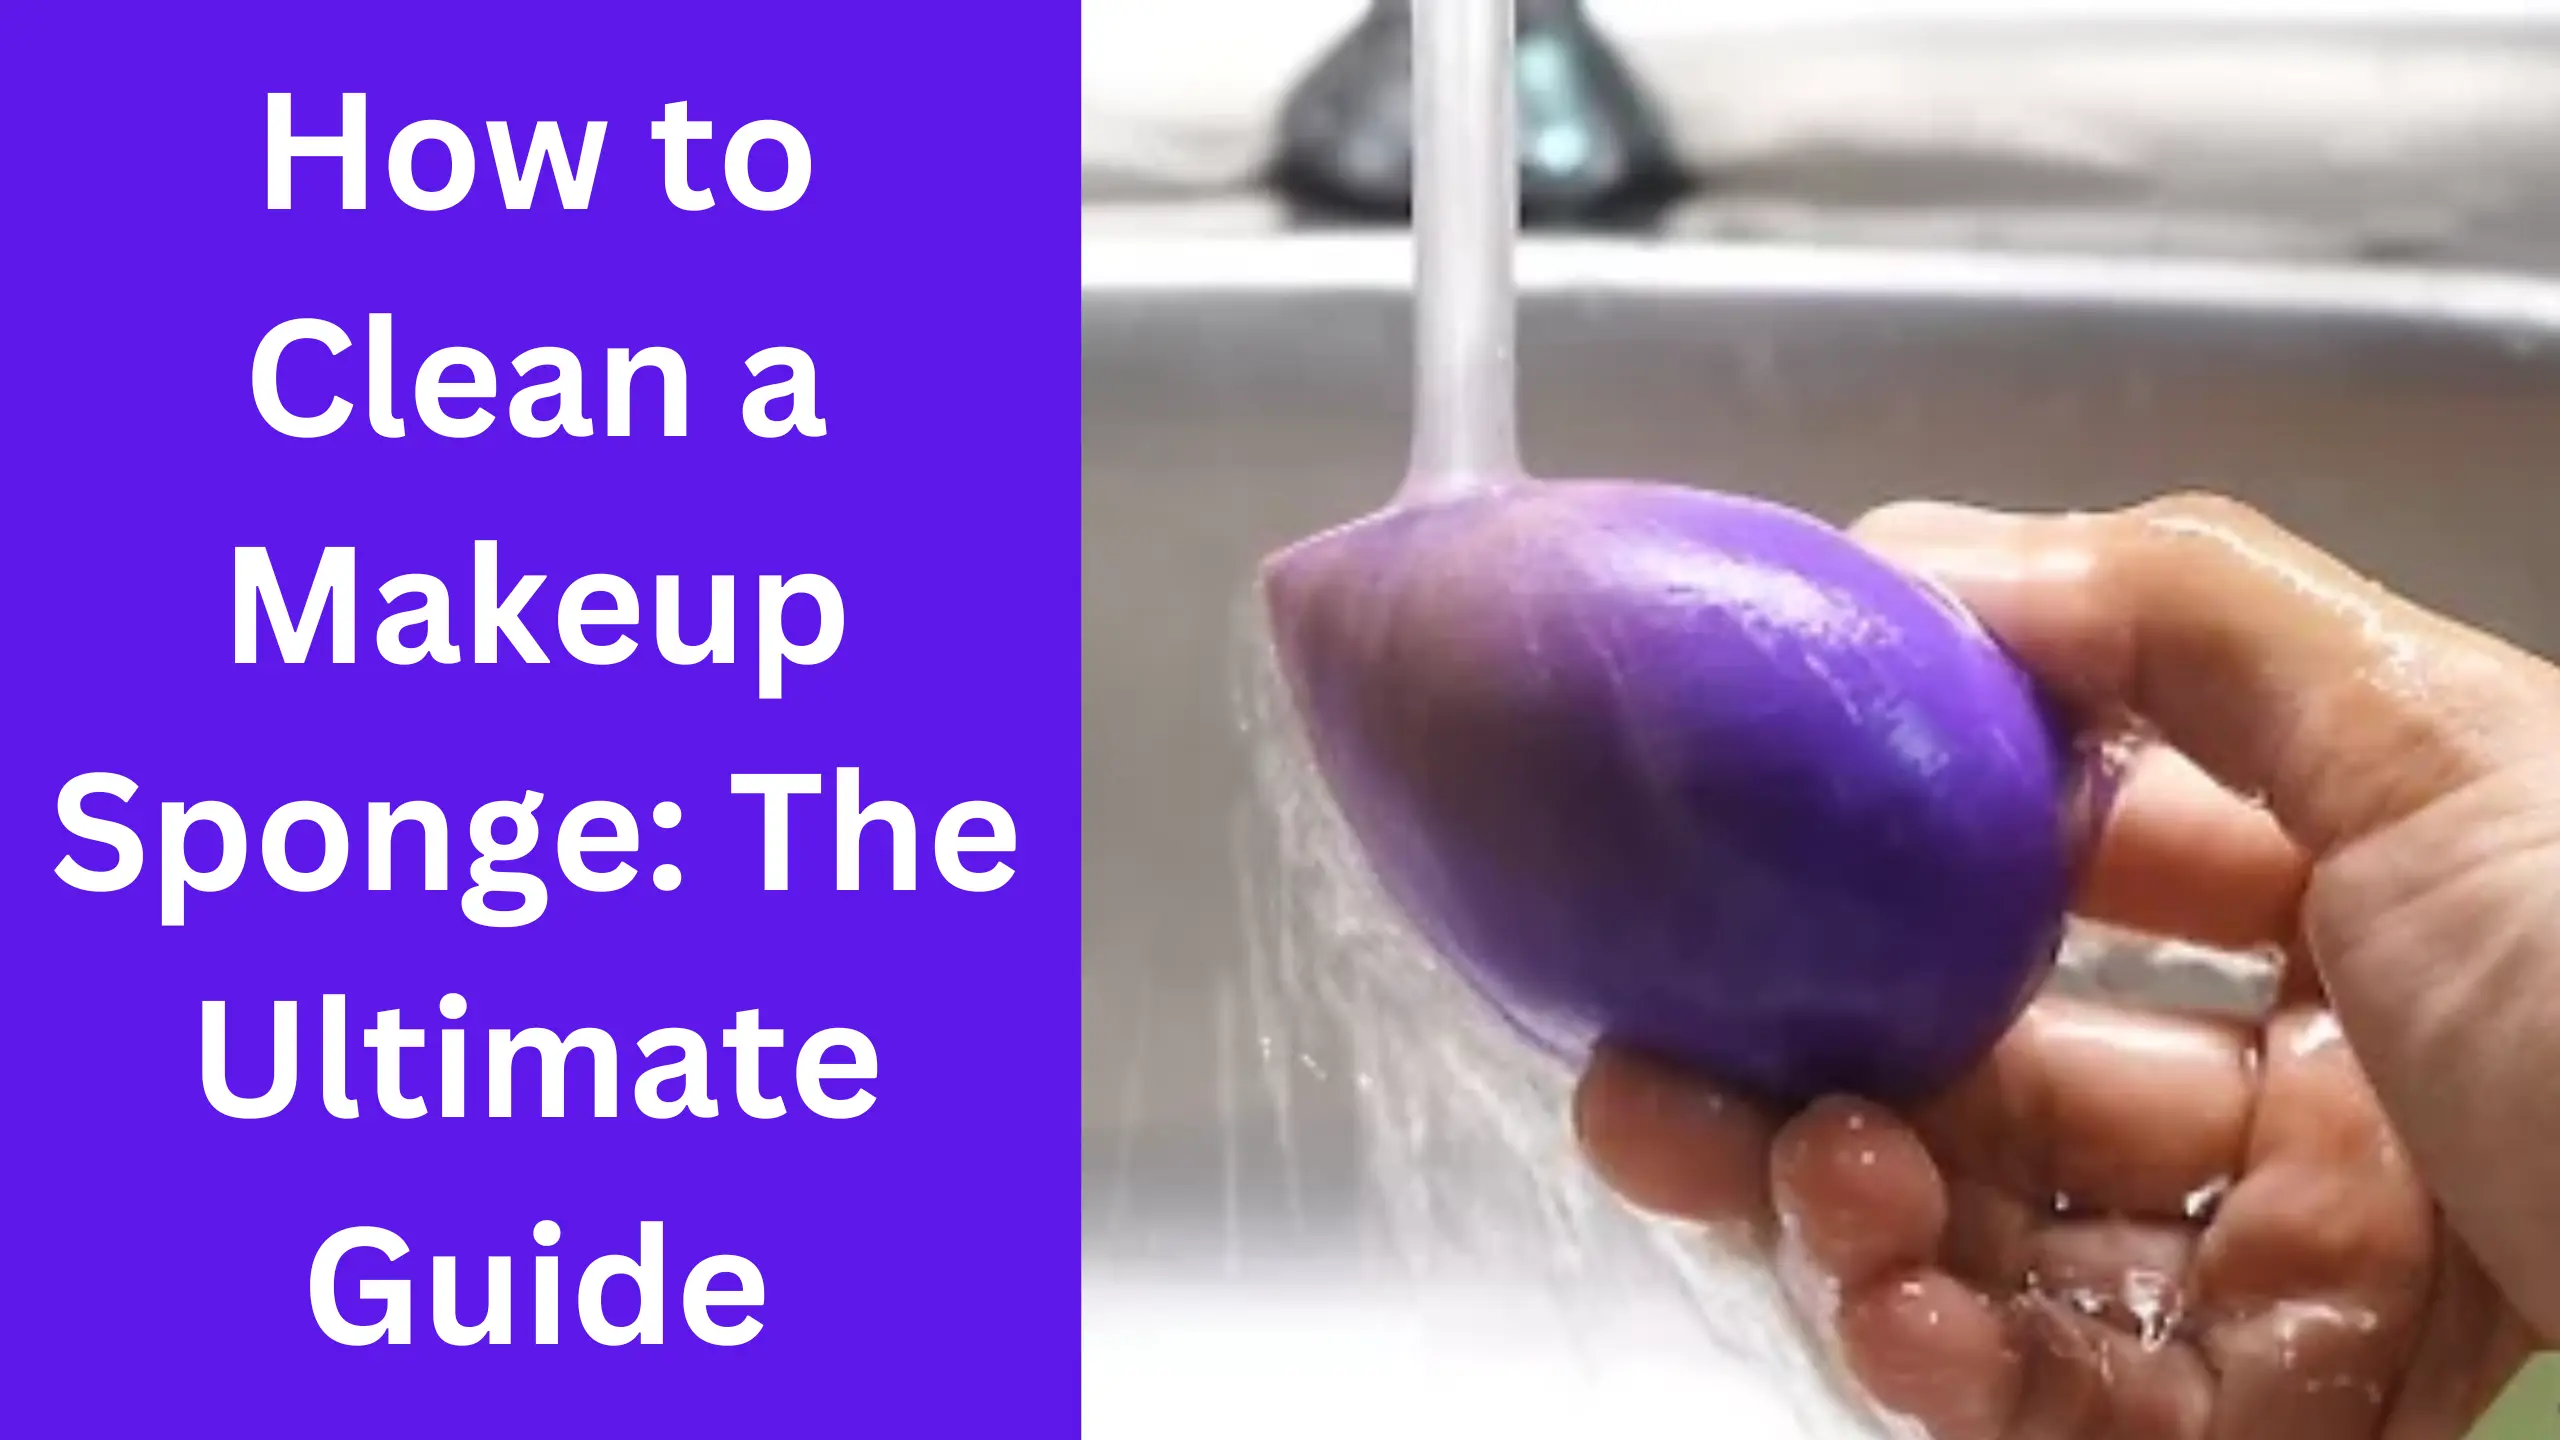 How to Clean a Makeup Sponge The Ultimate Guide